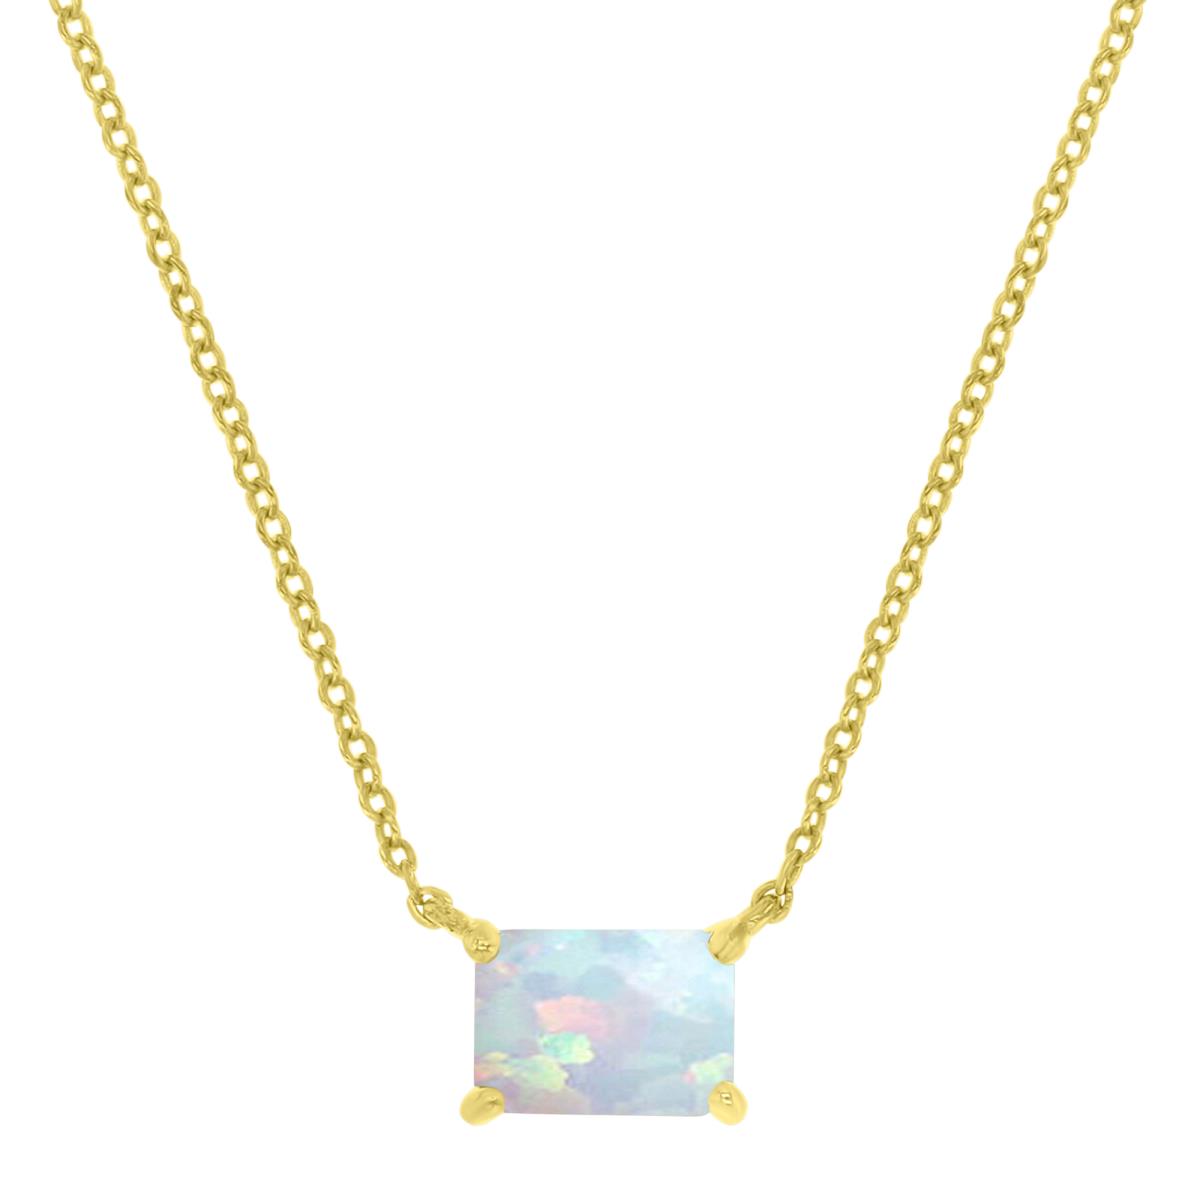 14K Gold Yellow 7x5mm Emerald Cut Created Opal 16+2" Solitaire Necklace